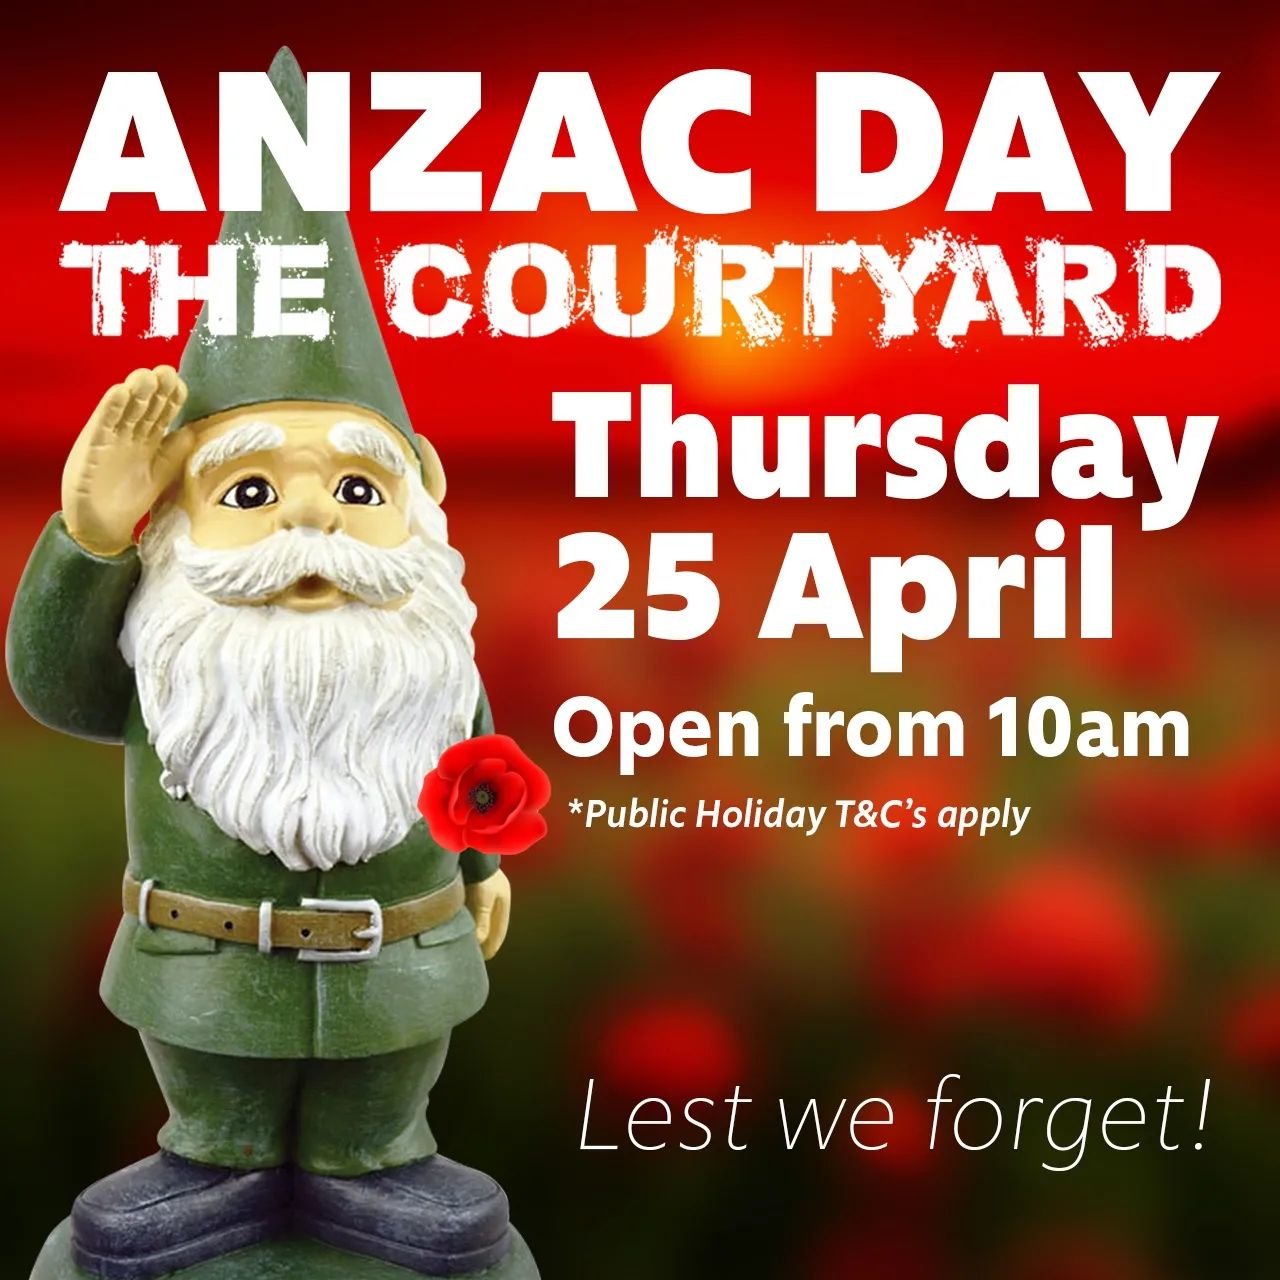 🇦🇺🇳🇿🇦🇺ANZACDAY🇳🇿🇦🇺🇳🇿
 
Join us as we remember those who have fallen before us. 

Doors open from 10am this ANZAC Day

#cairns #cairnsrestaurant #cairnsesplanade #cairnslagoon #anzacday #craftbeer #burger #tacos